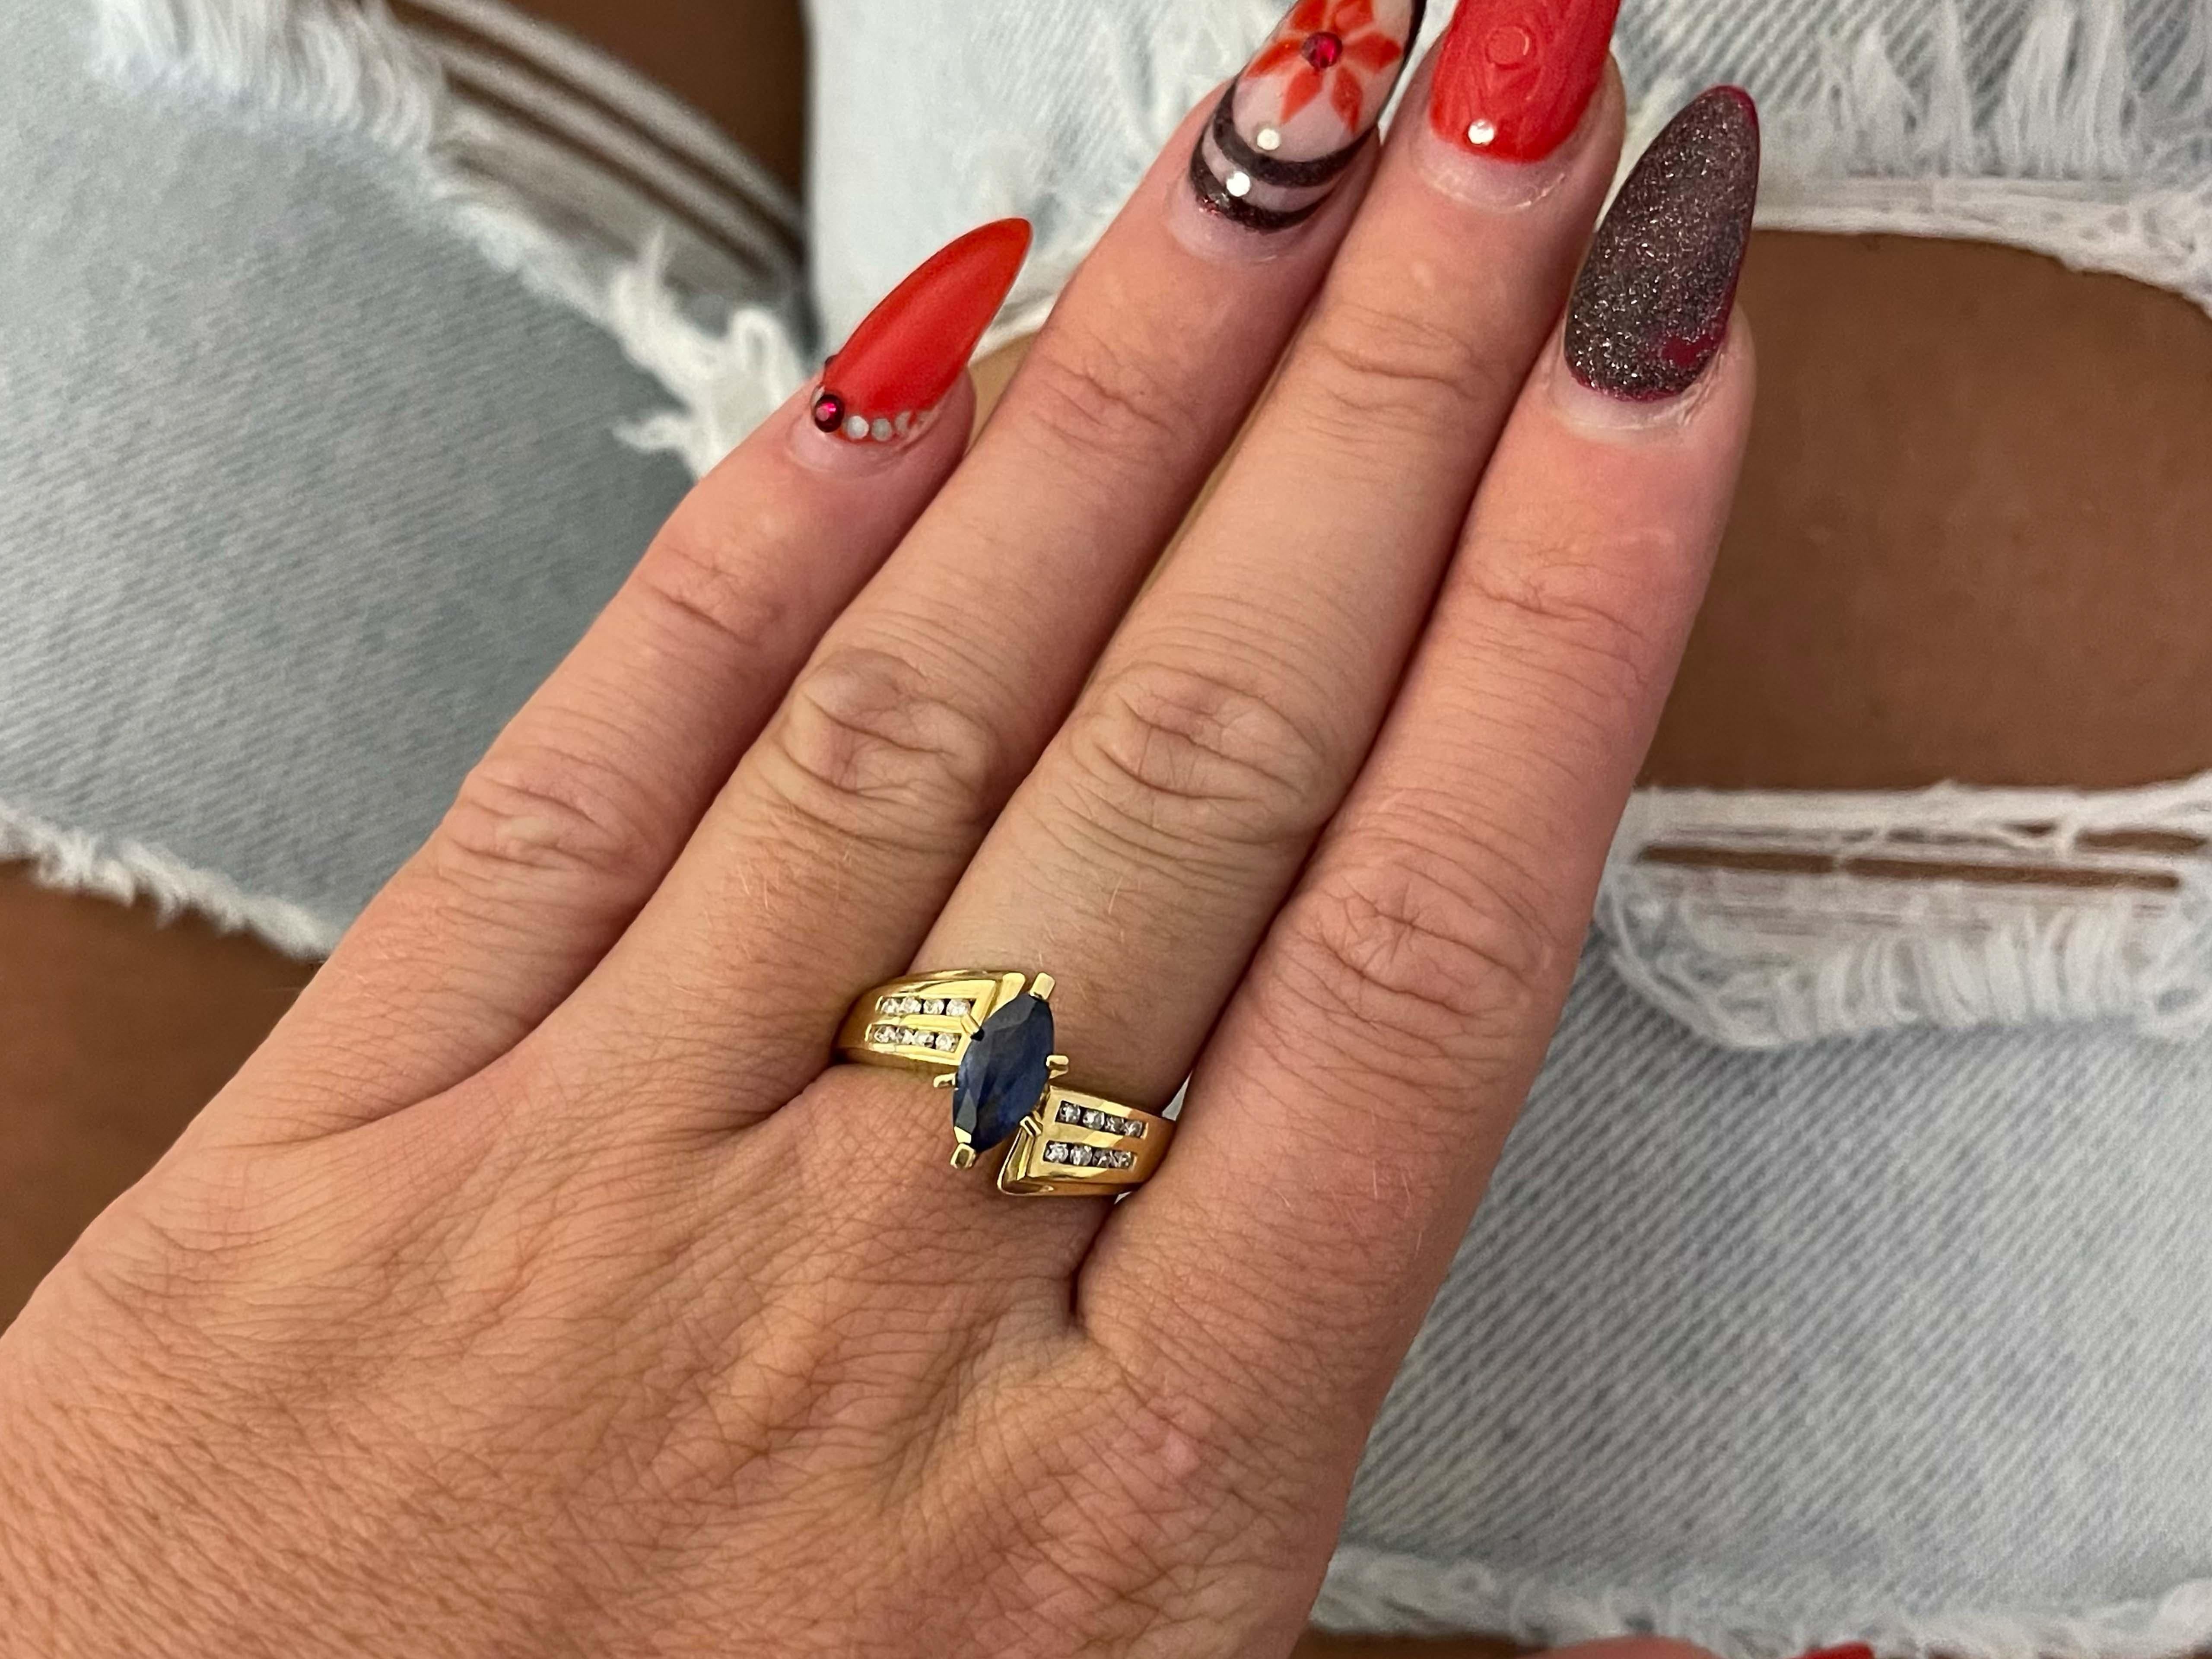 Item Specifications:

Metal: 14K Yellow Gold

Style: Statement Ring

Ring Size: 7.75 (resizing available for a fee)

Total Weight: 5.5 Grams

Ring Height: 12 mm

Gemstone Specifications:

Gemstone: 1 blue sapphire

Shape: marquise

Sapphire